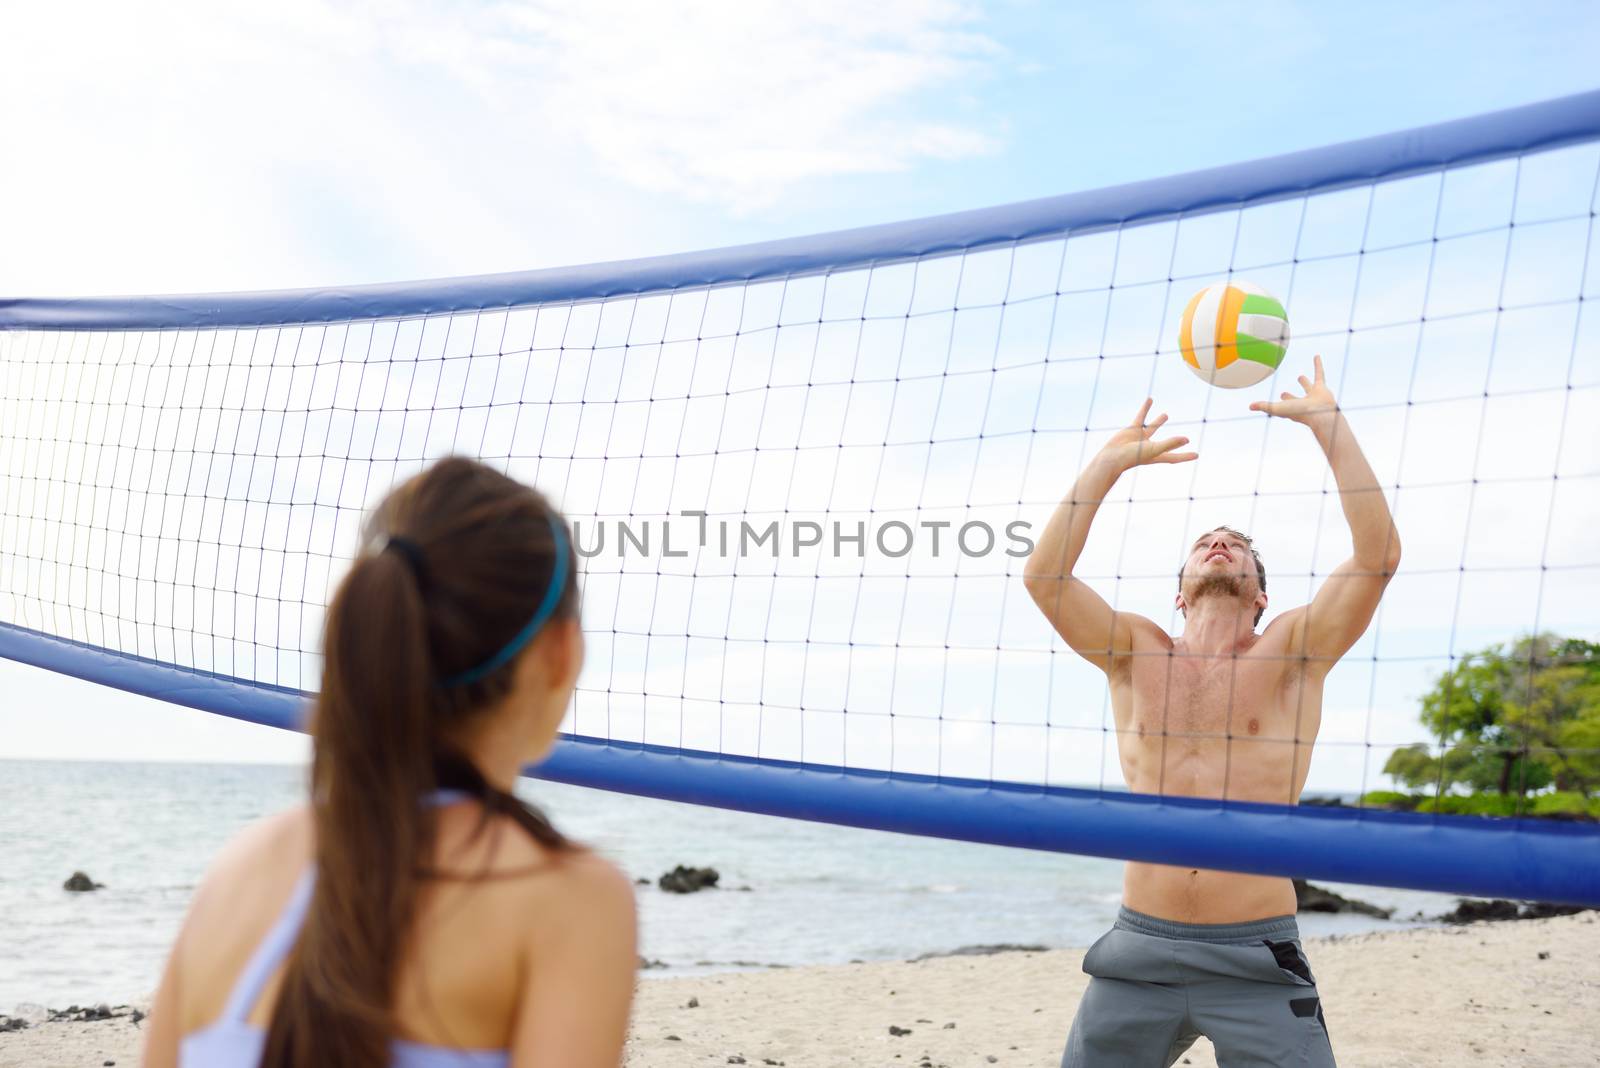 People playing beach volleyball having fun in sporty active lifestyle. Man hitting volley ball in game in summer. Woman and man fitness model living healthy lifestyle doing sport on beach.